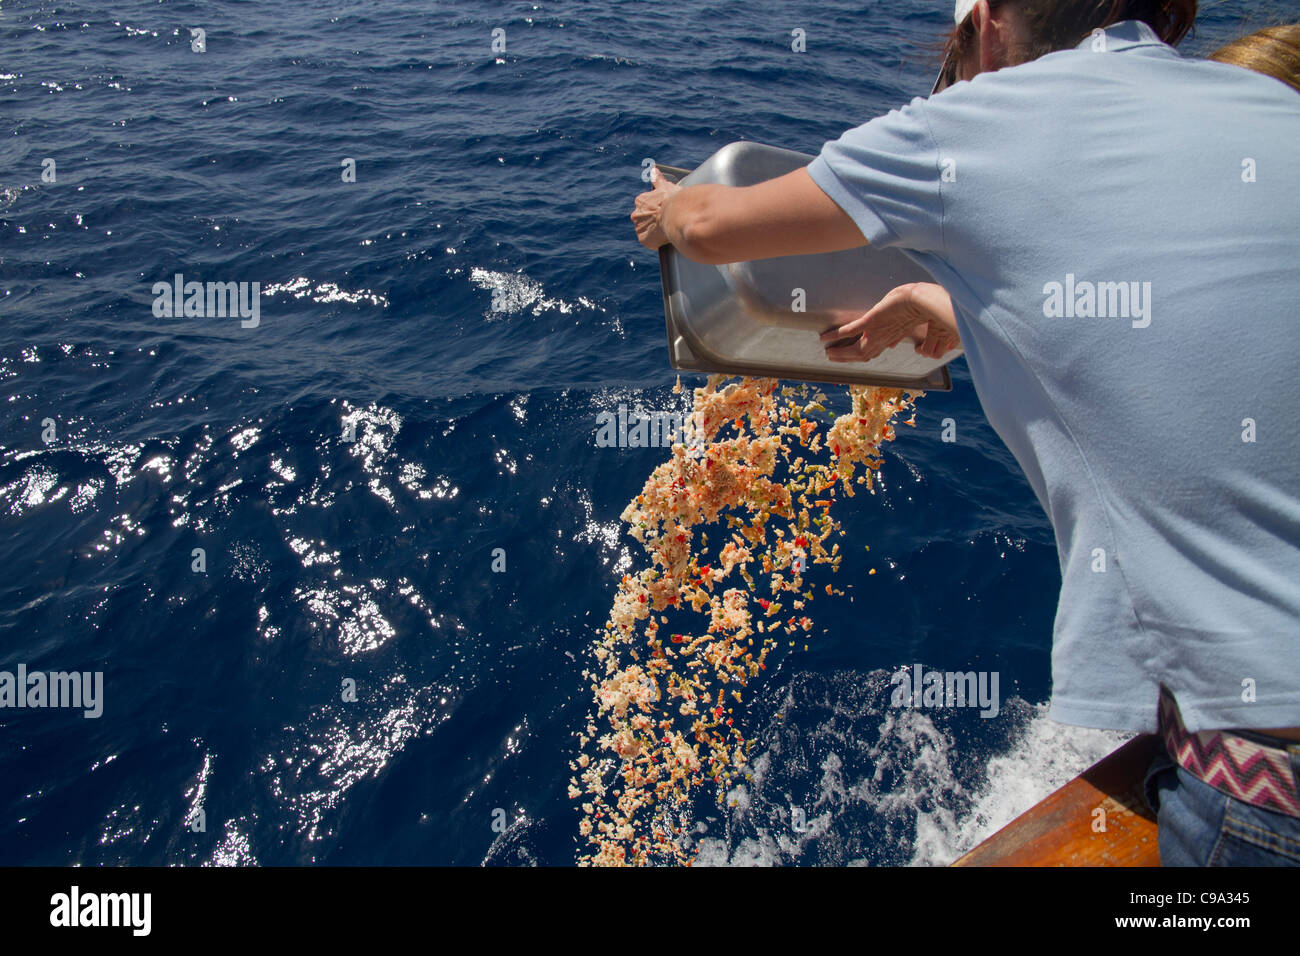 Person throw food scraps into the sea from deck of boat Stock Photo